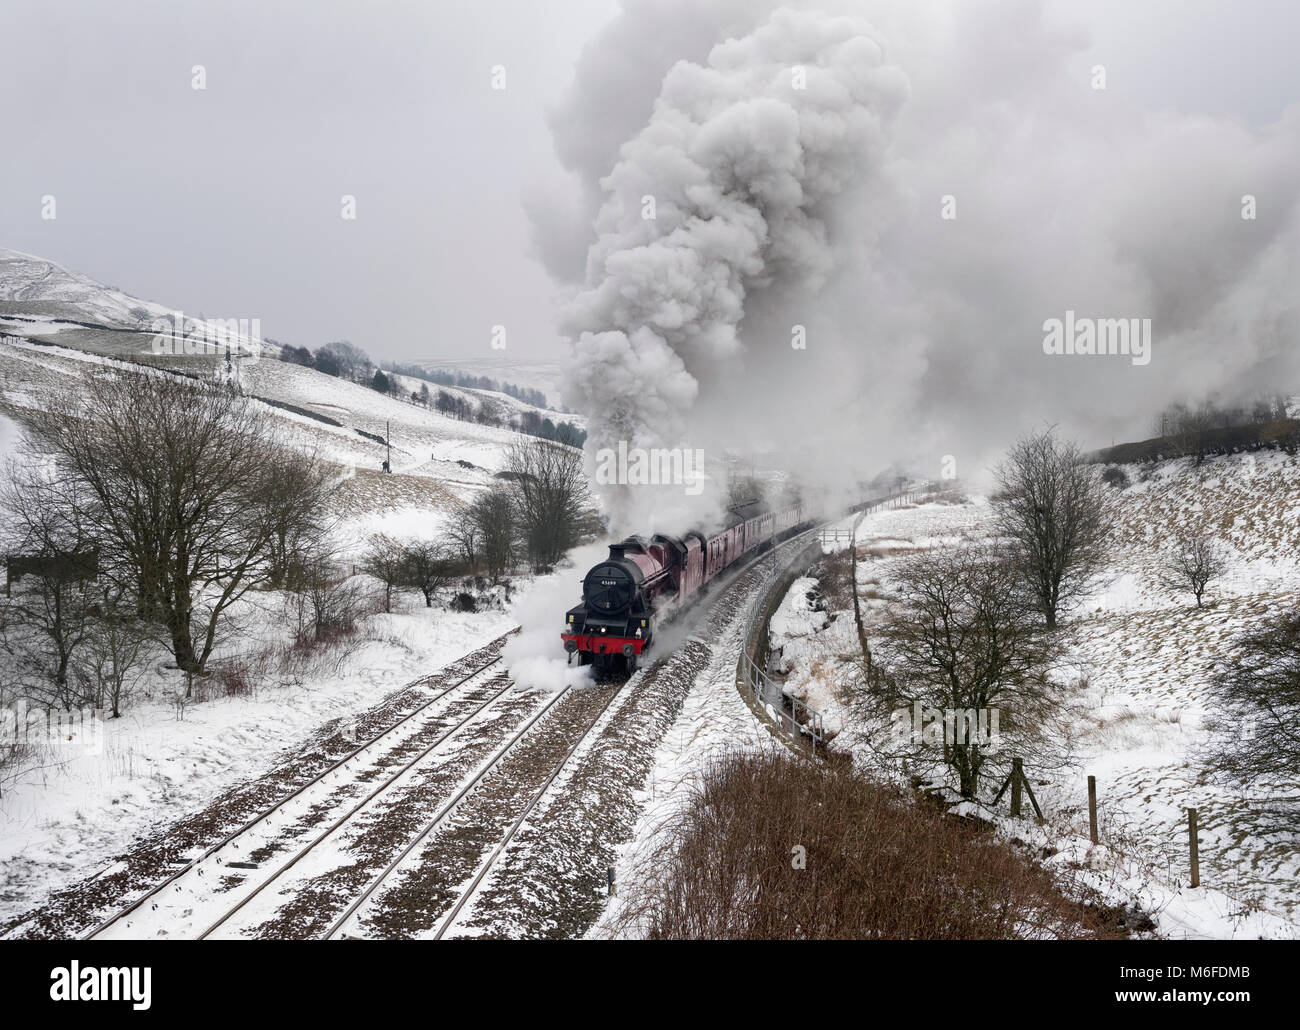 Lancashire, UK. 3rd March 2018. In a Wintery landscape, steam locomotive 'Galatea' hauls 'The Pennine Limited' special train up Copy Pit incline, near Burnley, Lancashire. The combination of cold weather and the steep gradient produce an impressive amount of smoke and steam from the locomotive. The trip went from Carnforth (Lancashire) to Preston, Manchester, Sheffield, Wakefield, and Blackburn before returning to Carnforth. Credit: John Bentley/Alamy Live News Stock Photo